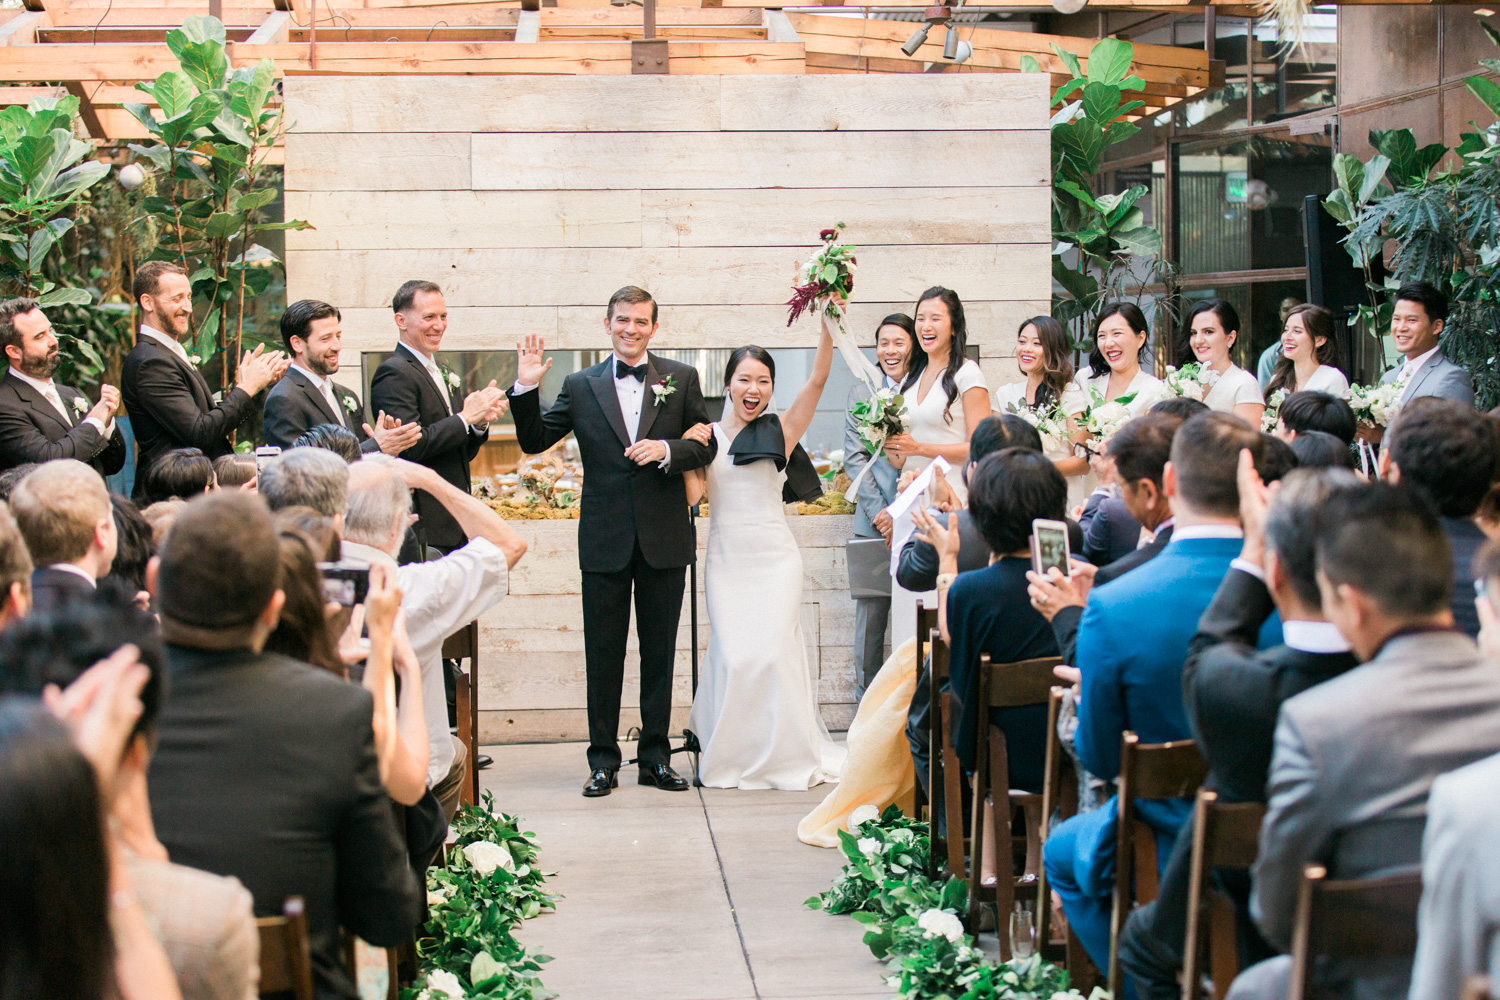 bride and groom celebrate after wedding ceremony at Hinoki & the Bird wedding, Moxie Bright Events